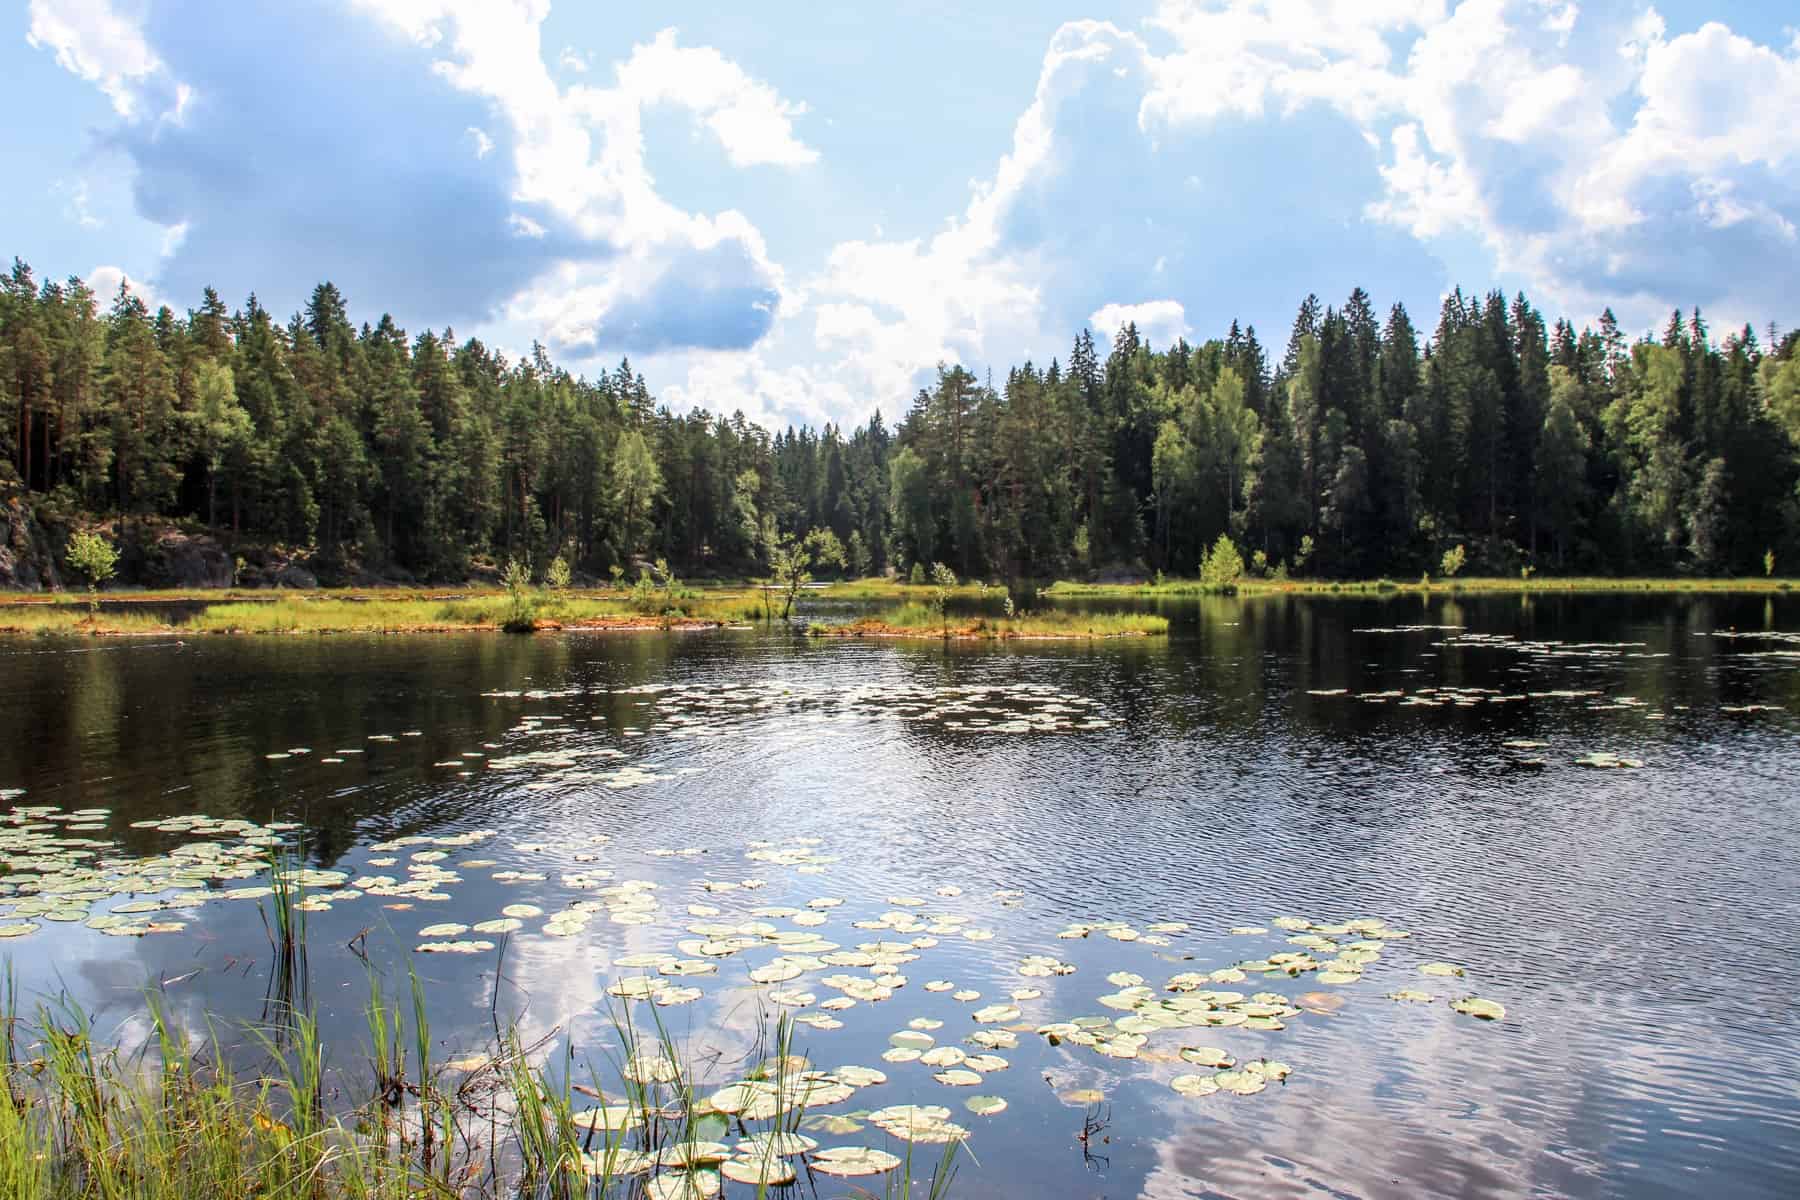 Finland For All – Everyman’s Right to Roam in Nature